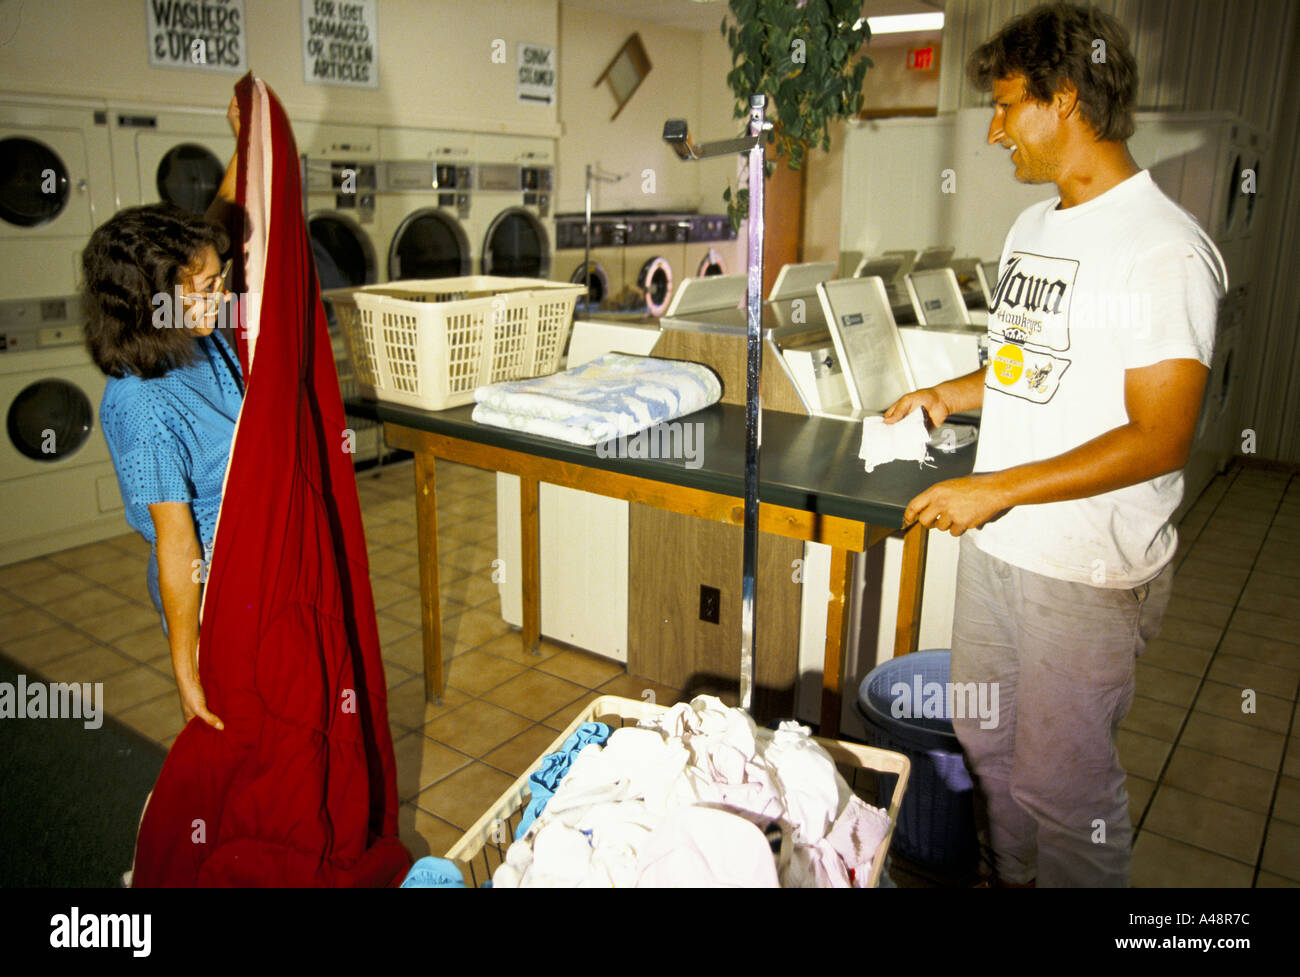 A woman talking to a man while folding up her red duvet in a launderette in Clinton Iowa Stock Photo